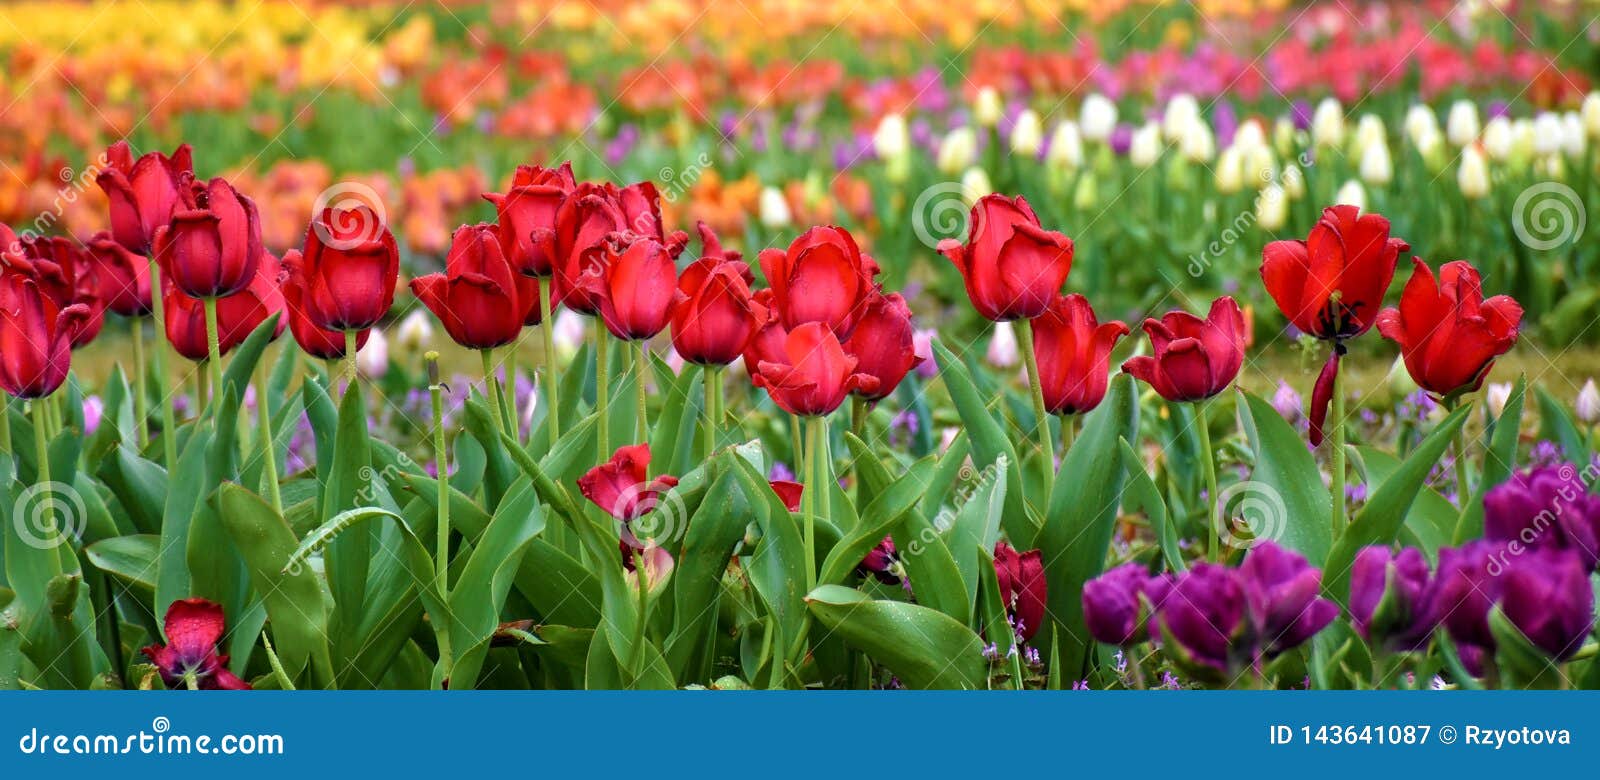 Multiple Colored Tulip Garden Stock Image Image Of Blossom